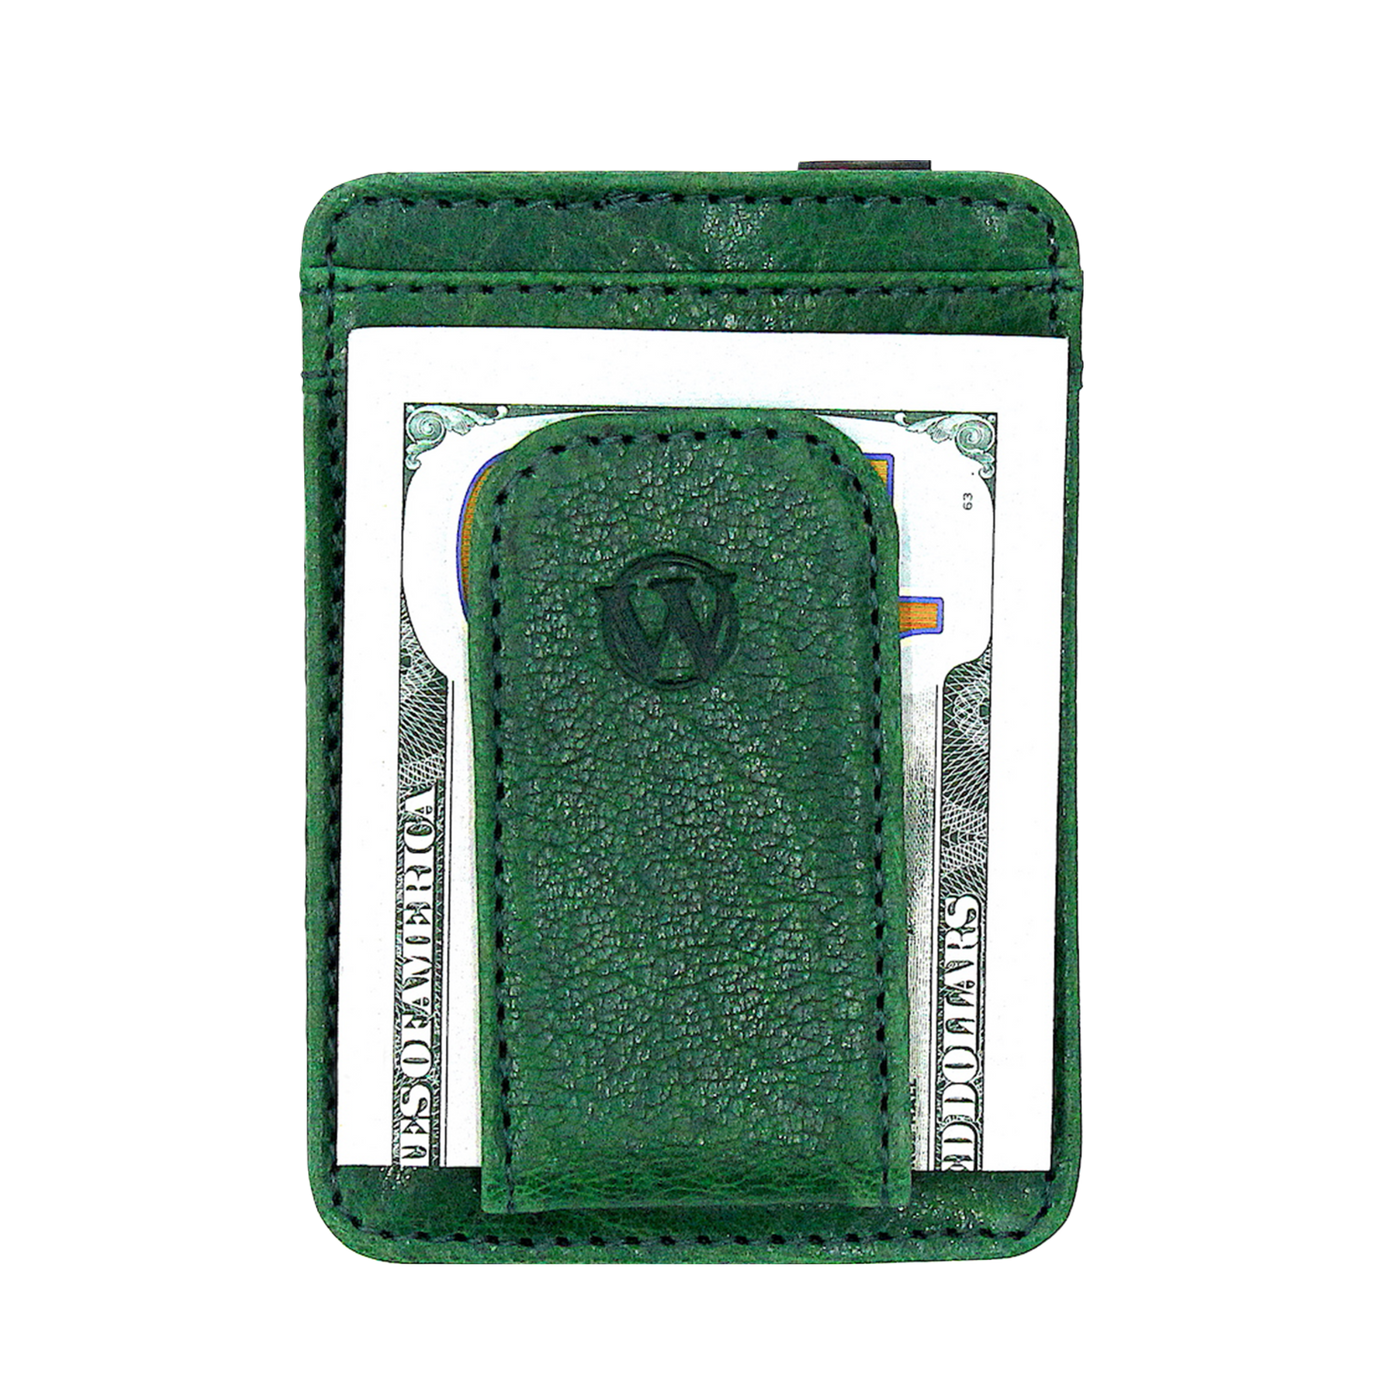 The Pursuit Front Pocket Bass Money Clip is a great minimalist wallet with premier full grain leather, bold & stylish hand-dyed color along with a debossed bass logo with a magnetic clip. Perfect for your fisher! 2 Card Slots Strong Magnetic Closure | Holds 10+ Bills Sleek, Modern Design Dimensions: 4"L x 2.8"H RFID Protection Color: Moss